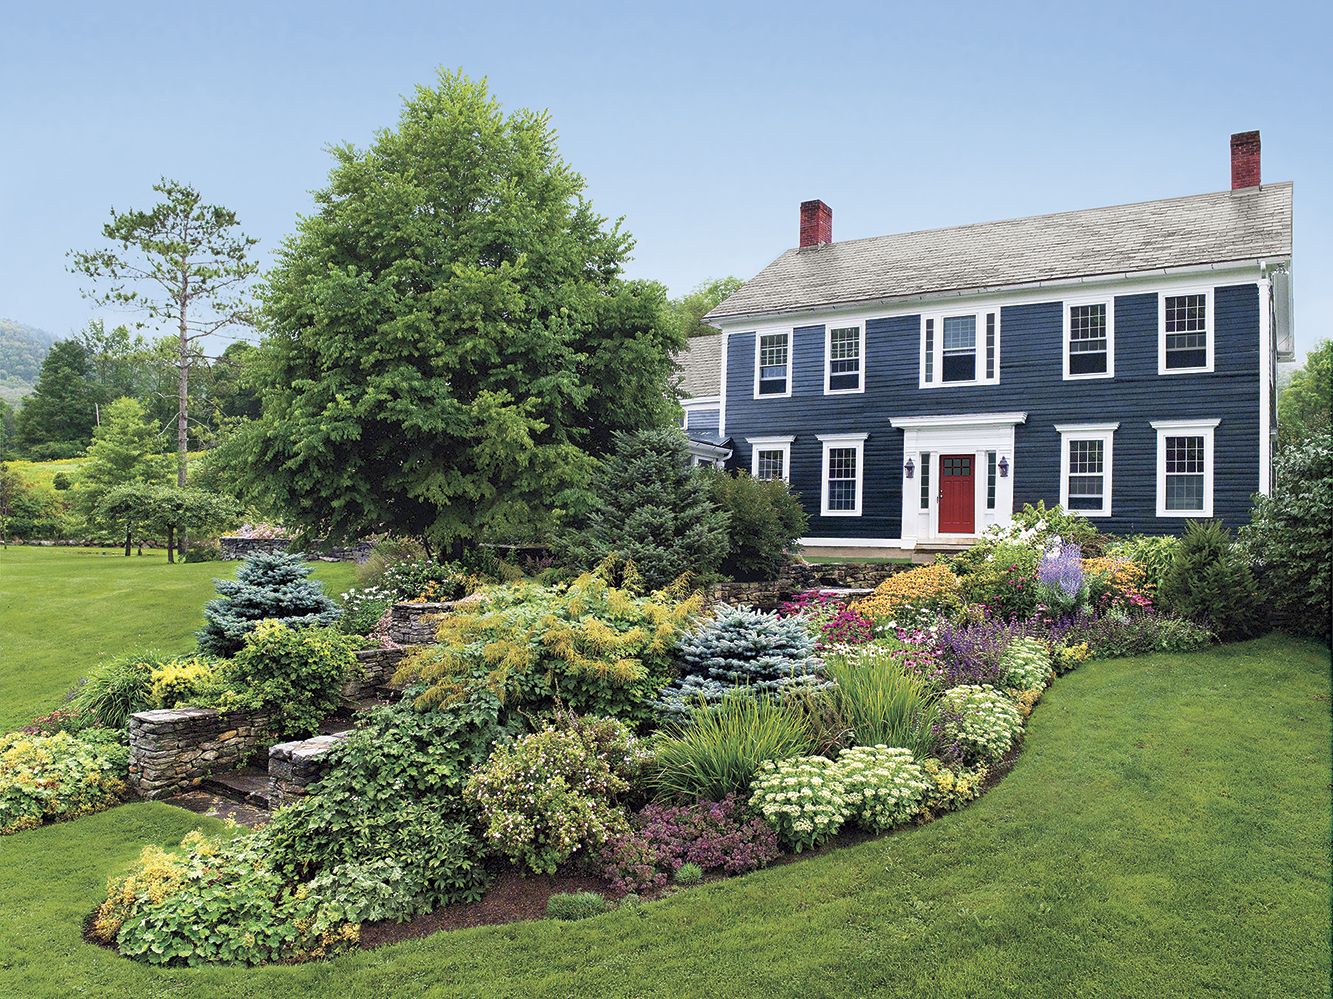 12 Upkeep Ideas to Add Curb Appeal - This Old House